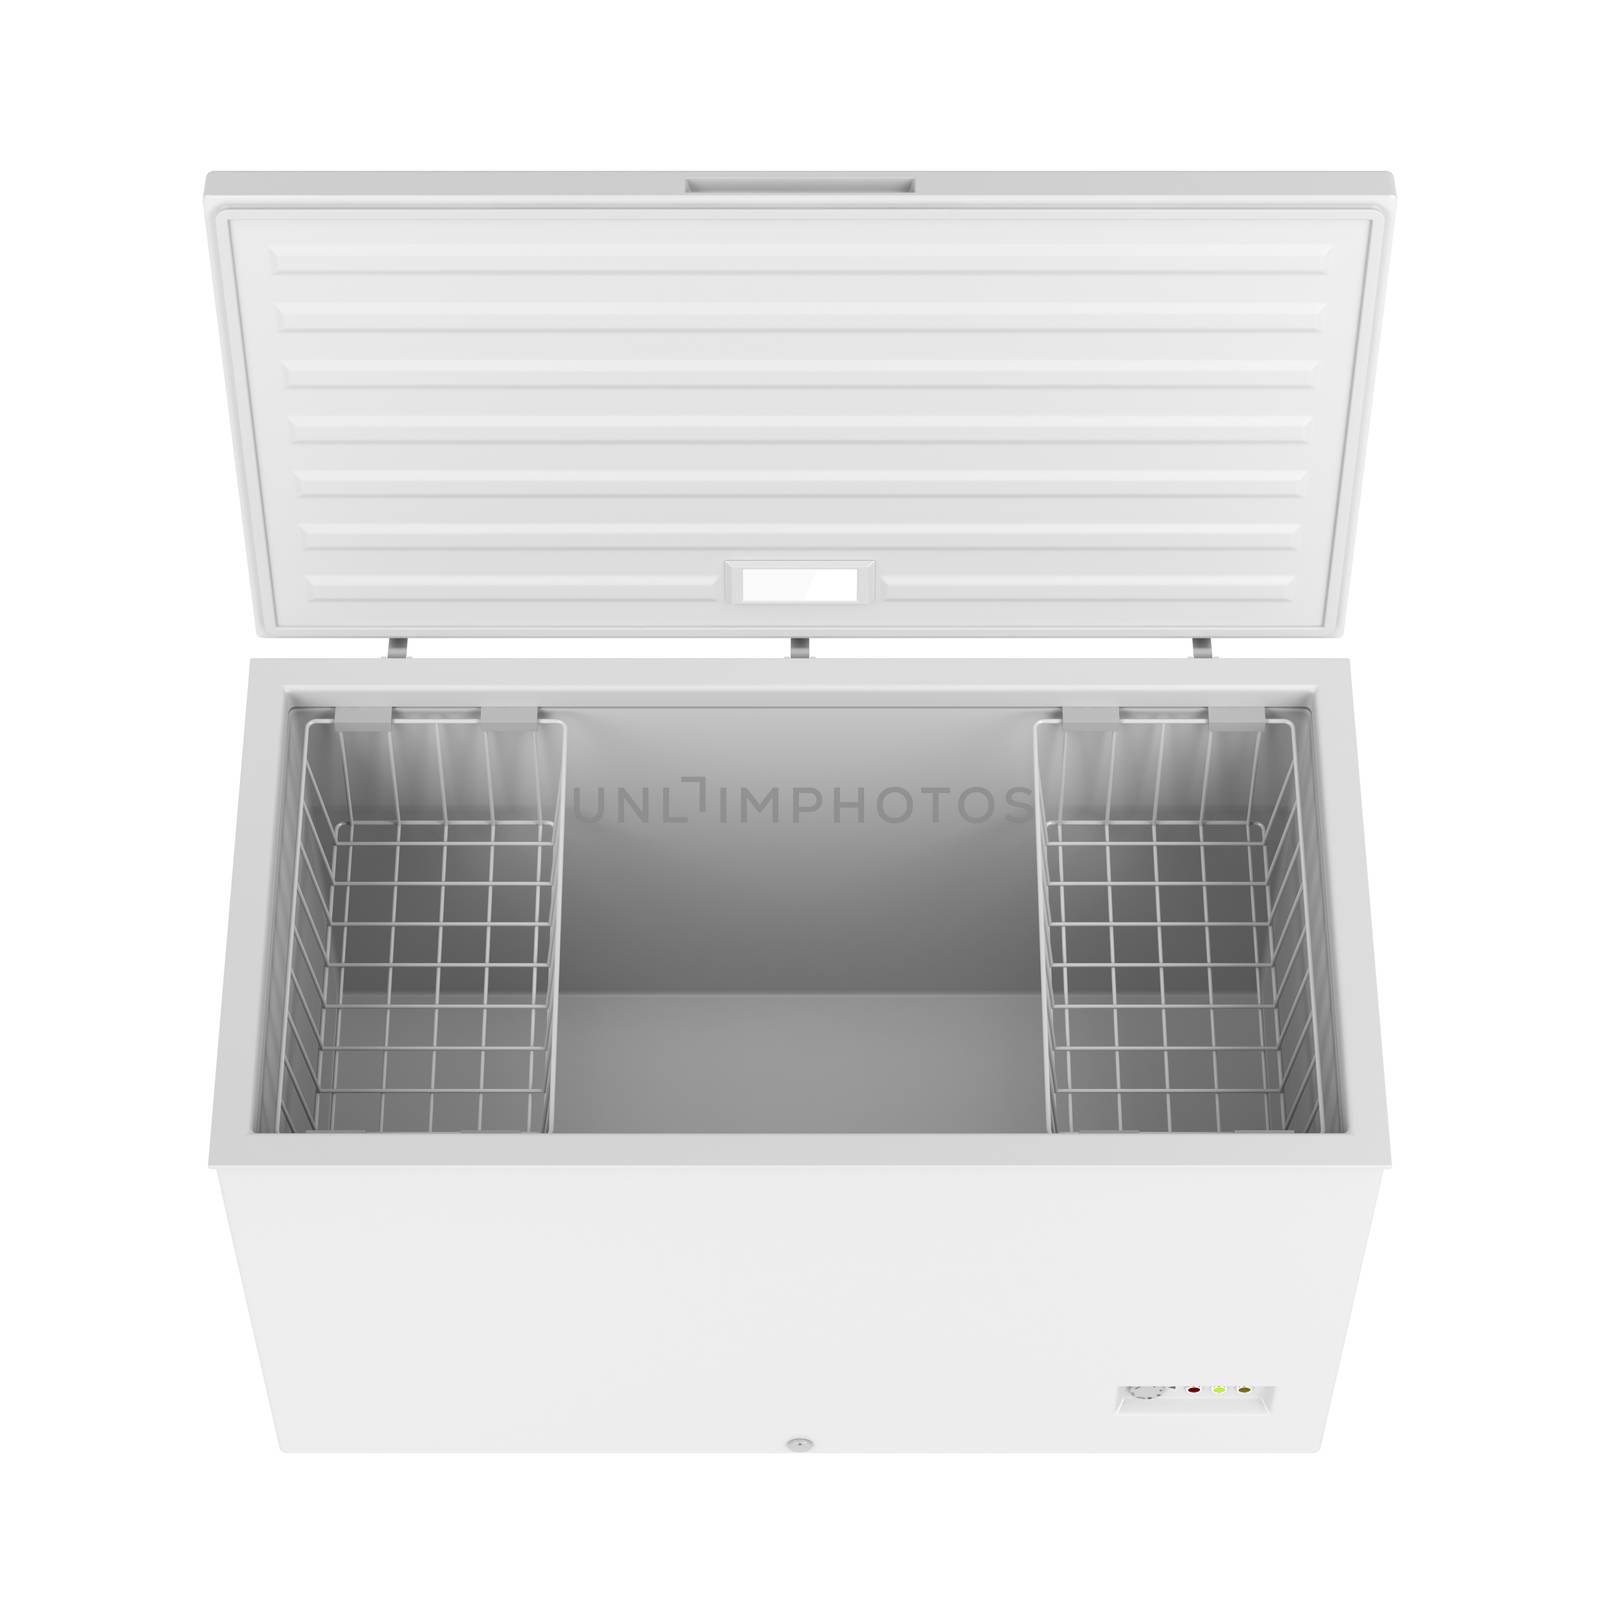 Open freezer by magraphics